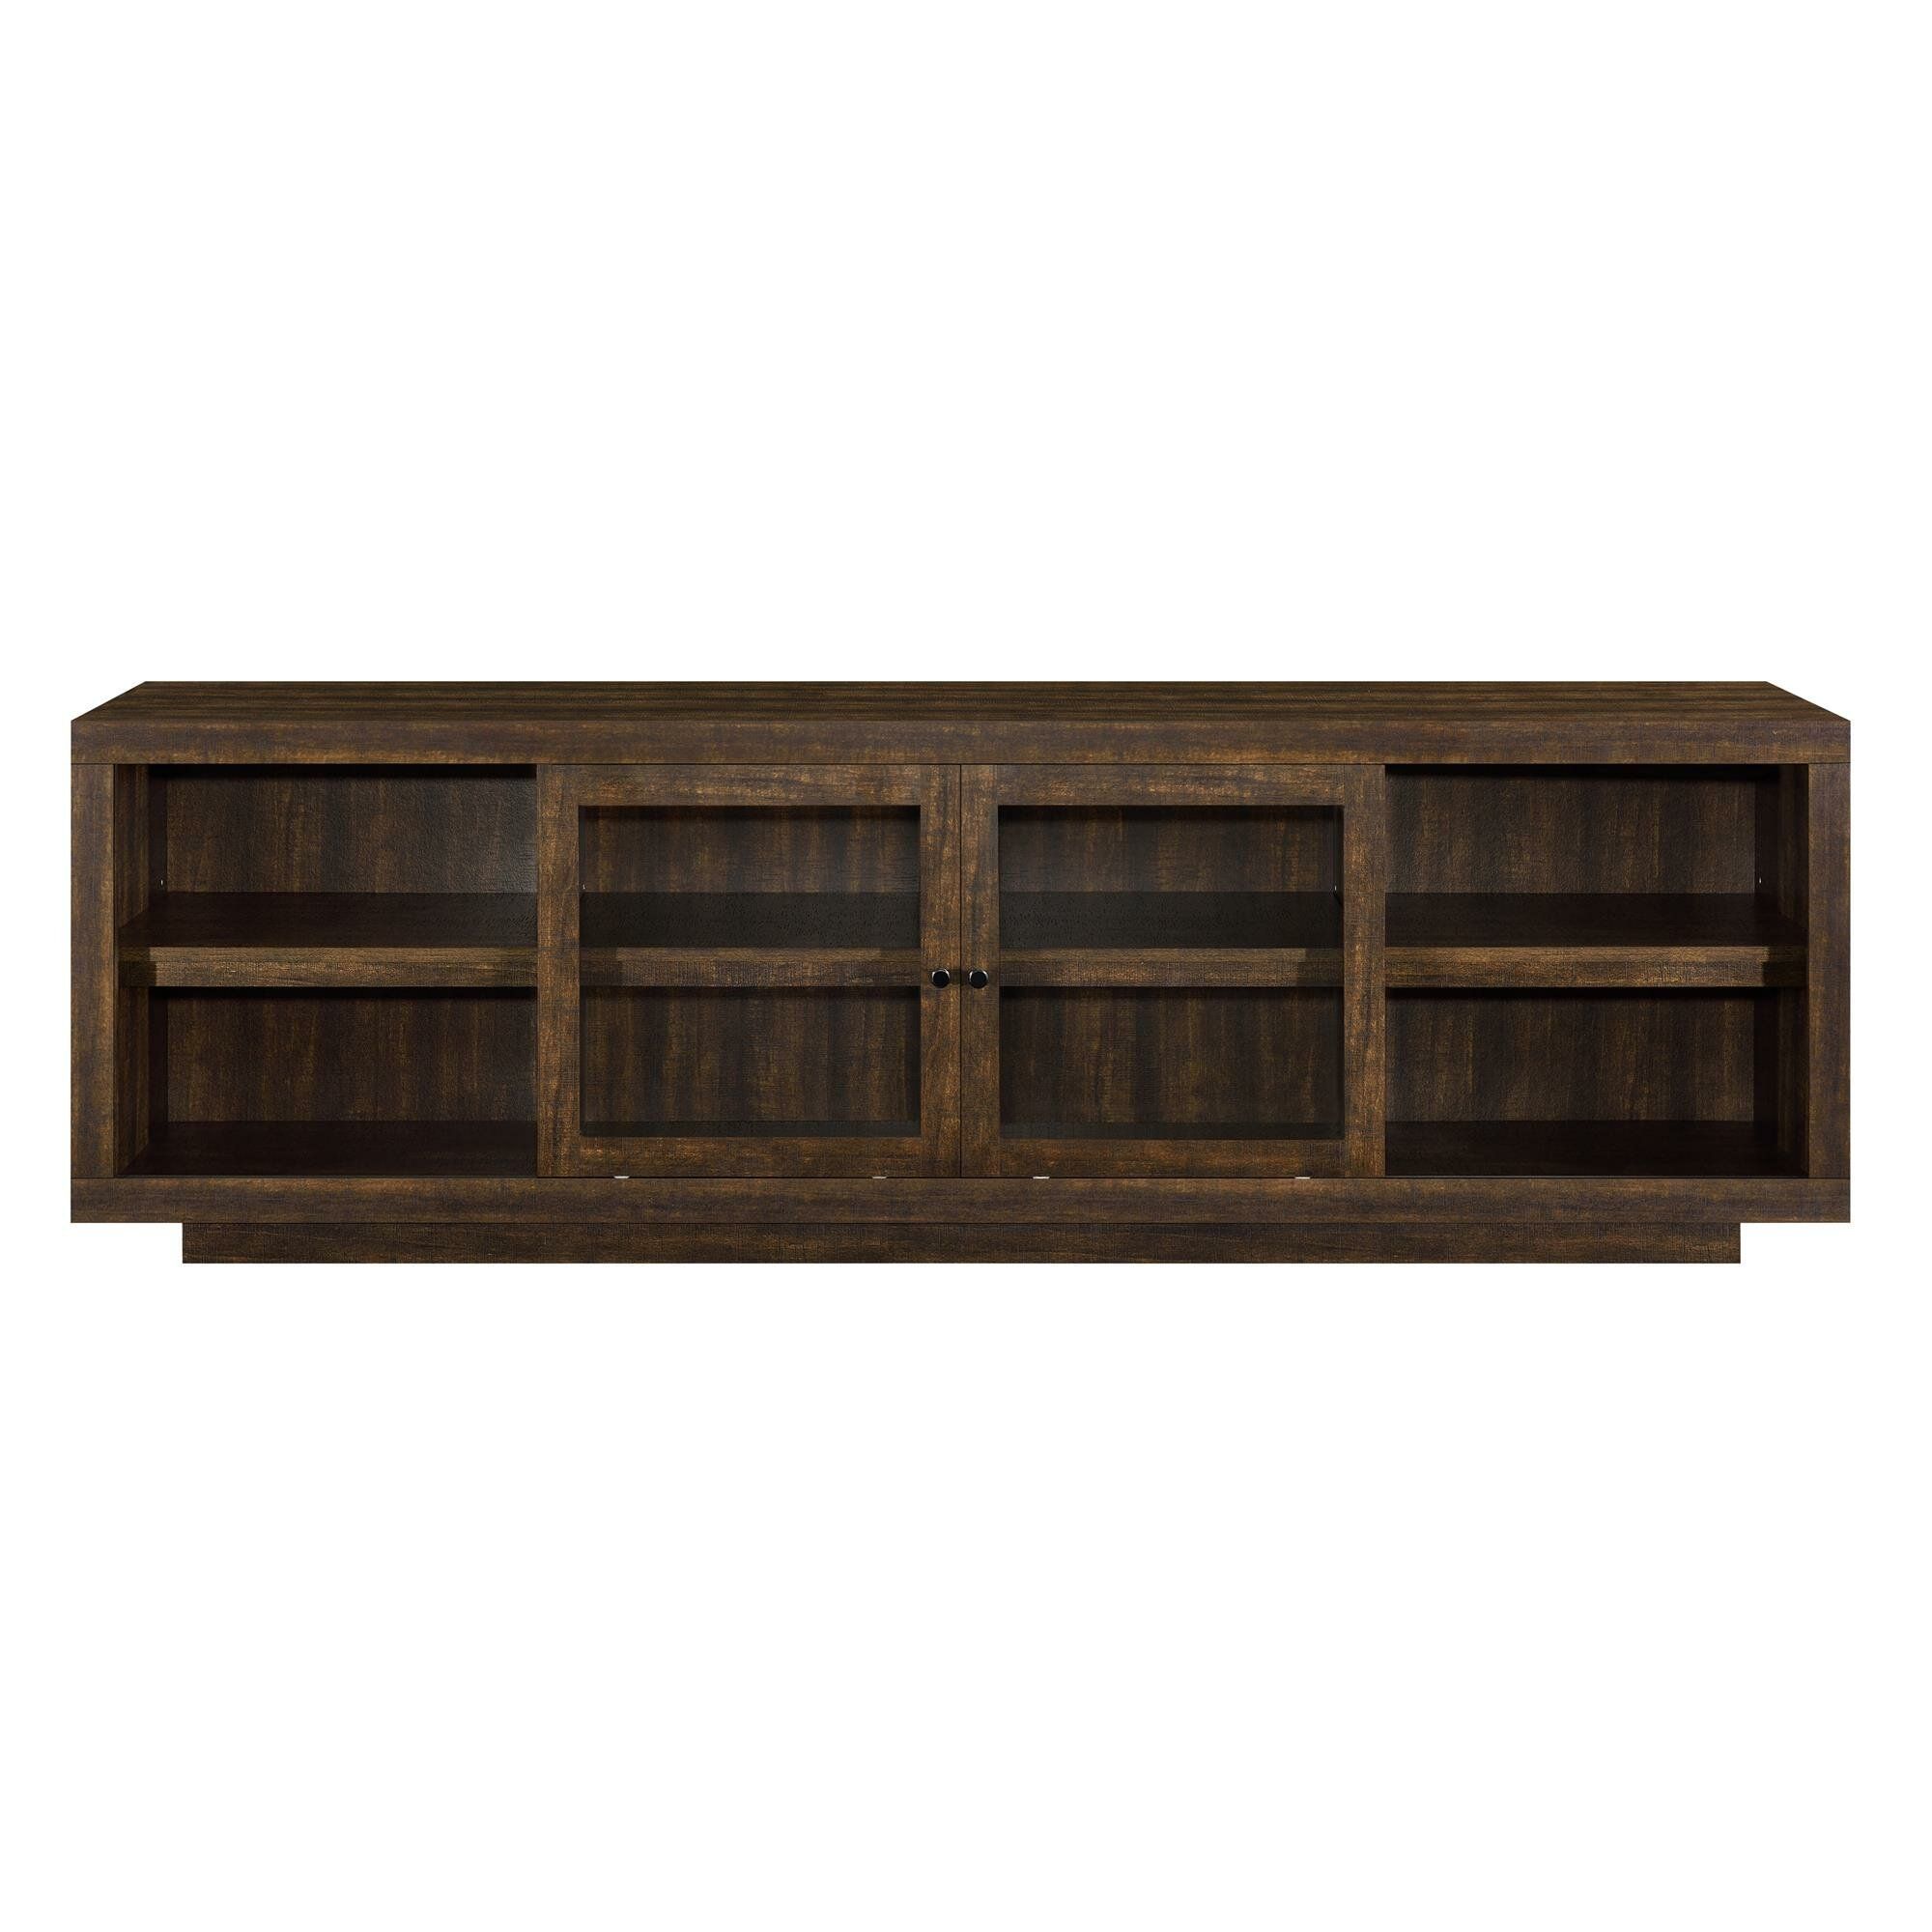 Tott And Eling Tv Stand For Tvs Up To 70" Throughout Tott And Eling Sideboards (View 2 of 30)